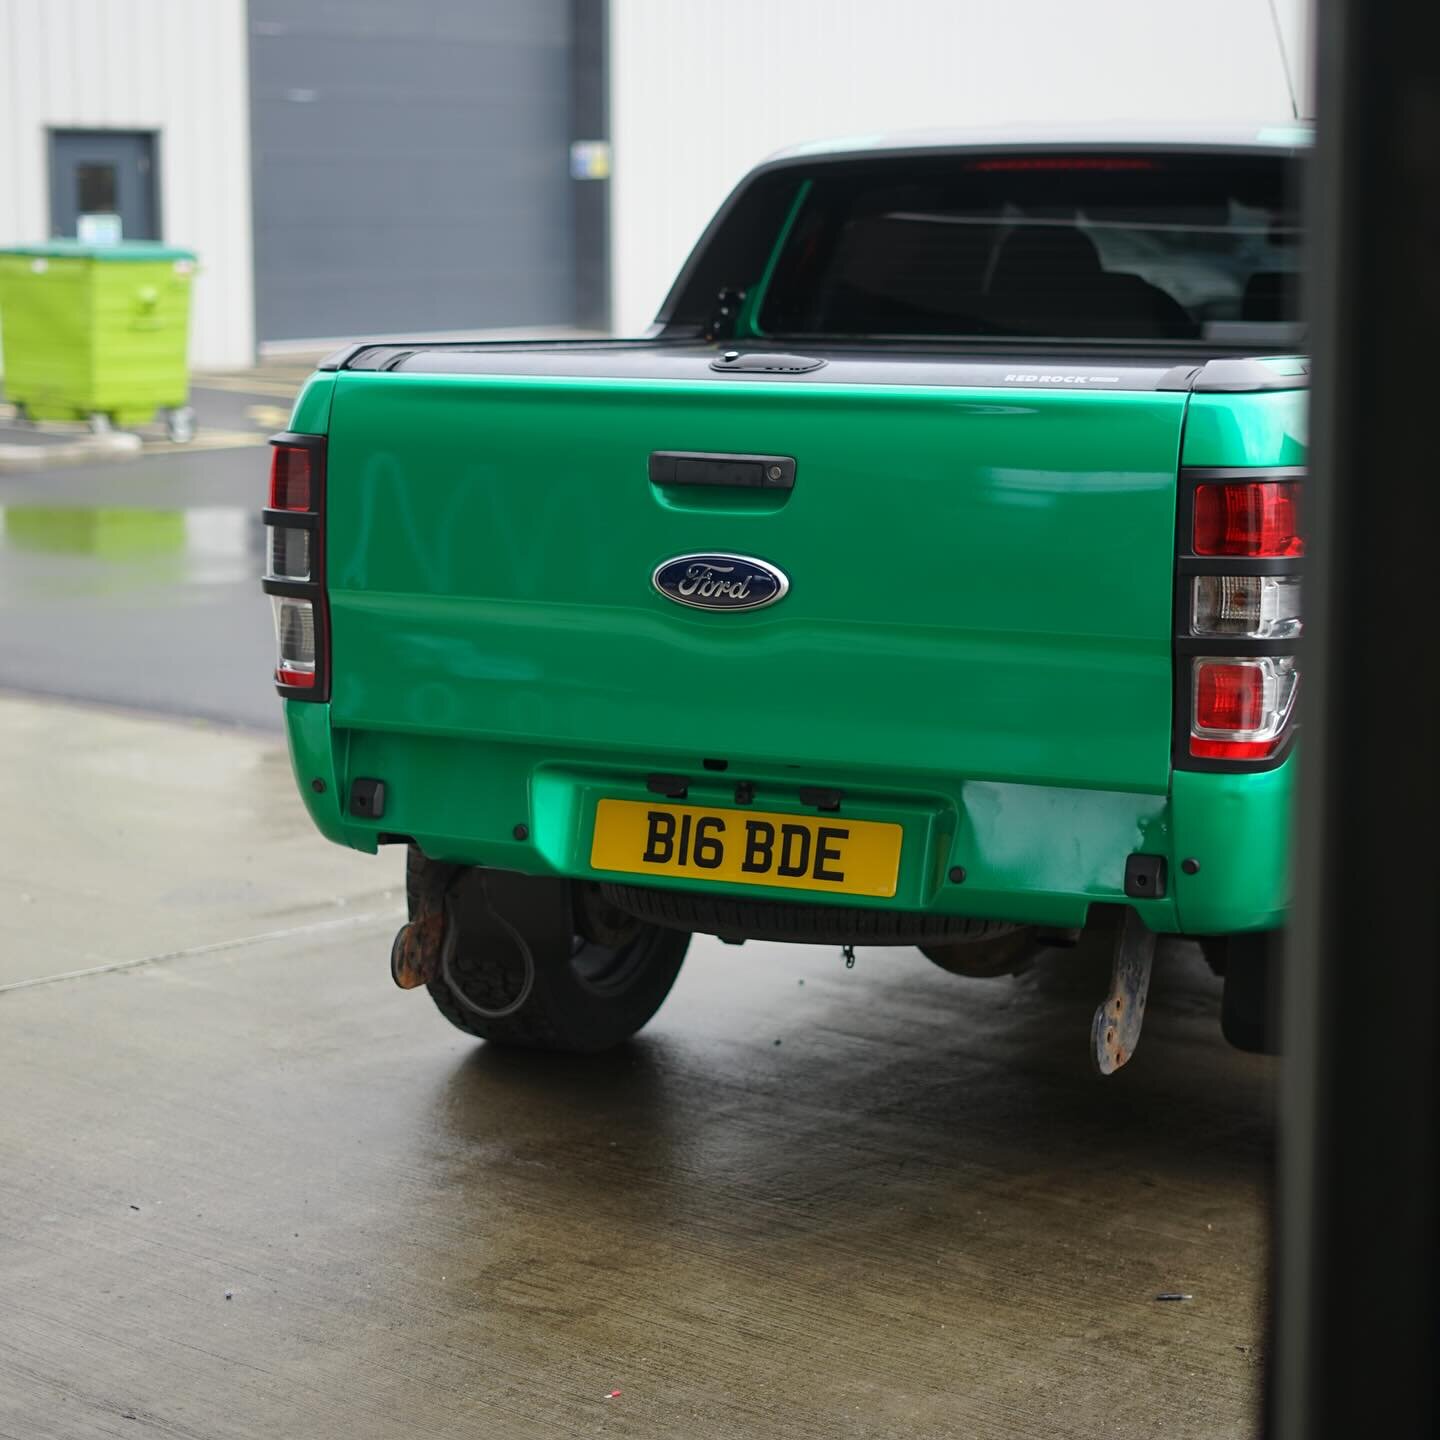 This Ford Ranger Has Had Several Transformations With Us, This Time We Stripped The Old Matt Black Wrap And Gave It A New Look With 3M&rsquo;s new High Gloss Green Envy. @3mfilmsuk 

Need A Vehicle Branding? 

Get In Touch And Let Us Transform Your V